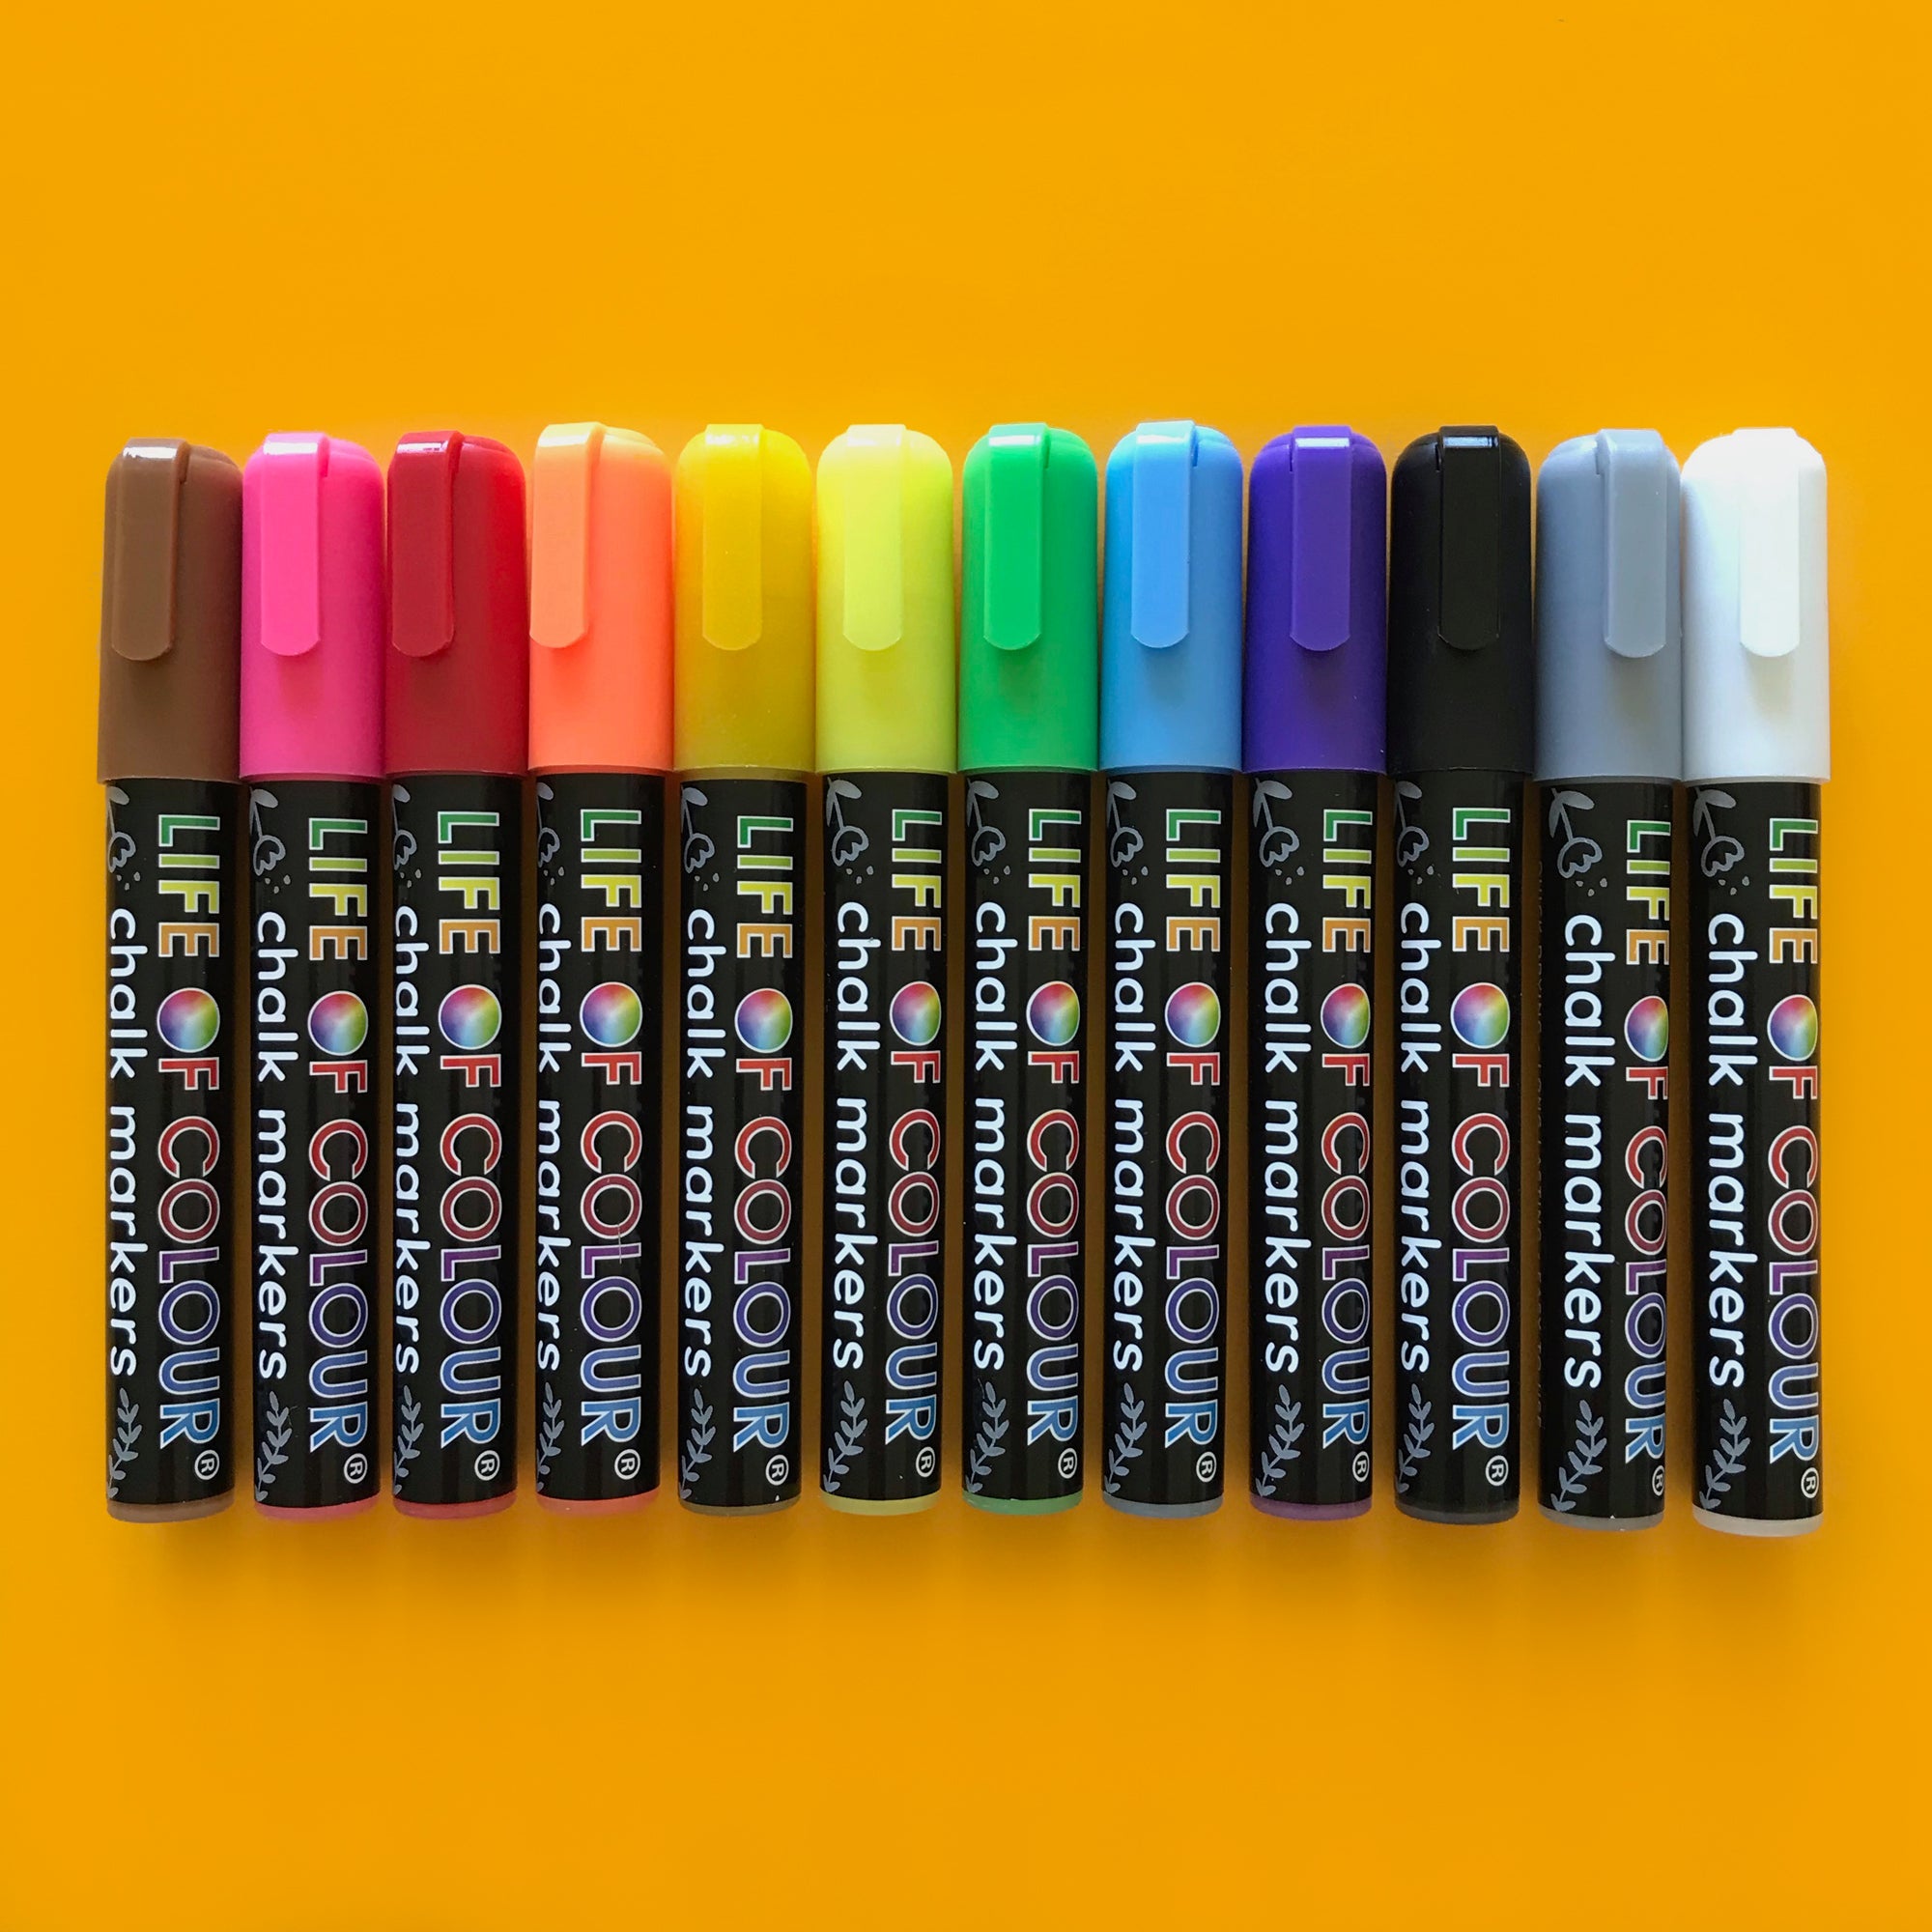 12 Life of Colour Liquid Chalk Markers